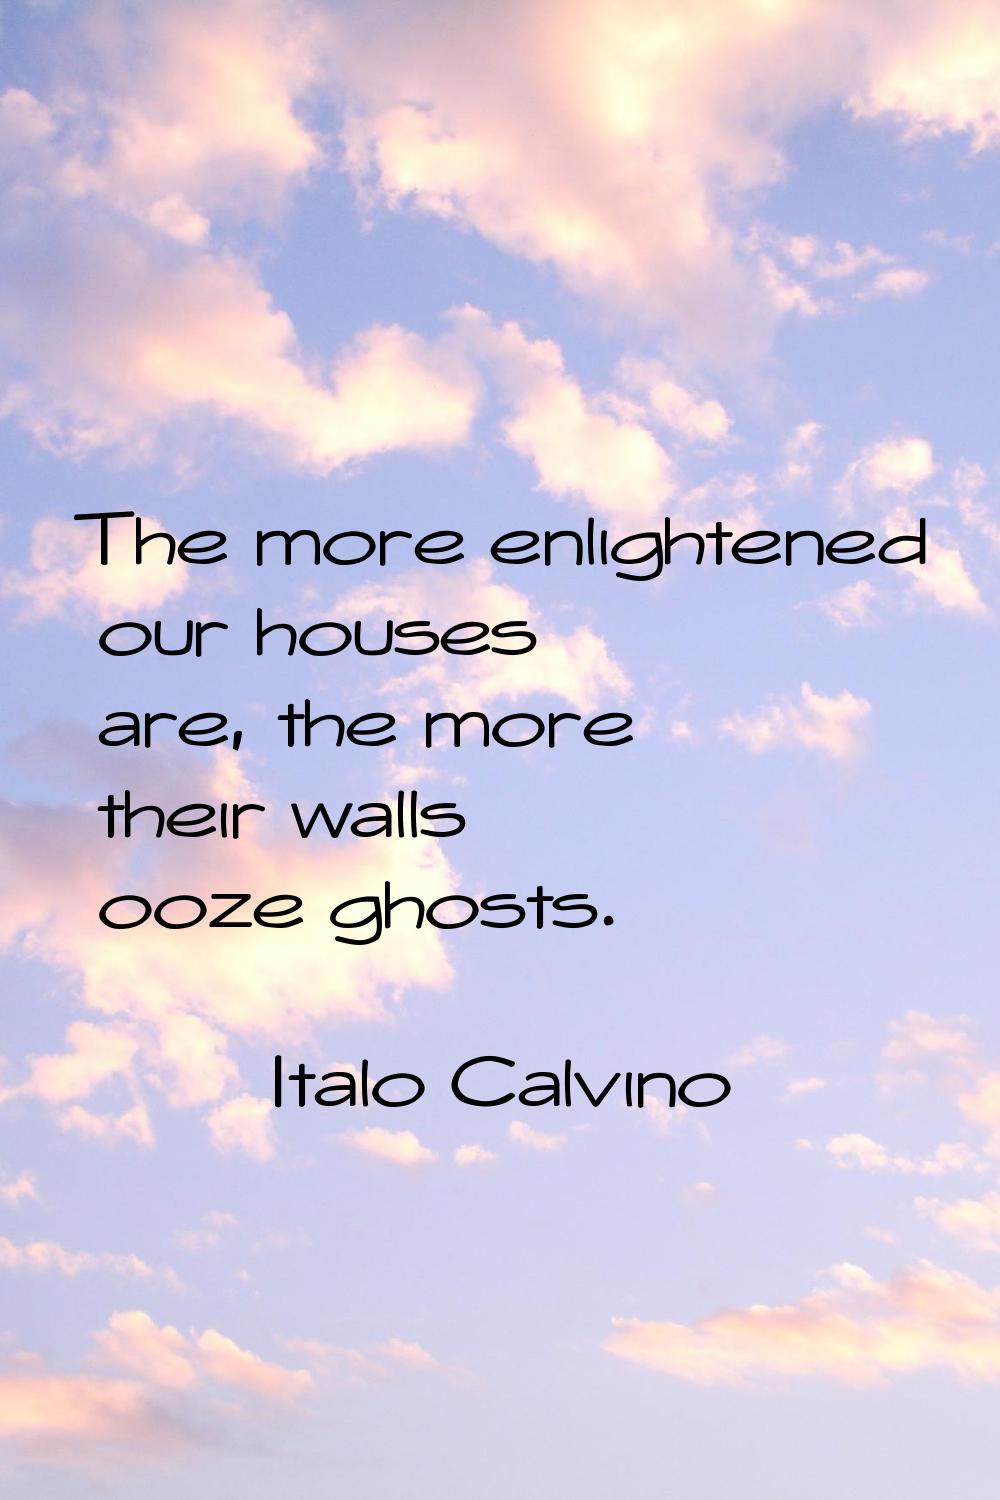 The more enlightened our houses are, the more their walls ooze ghosts.